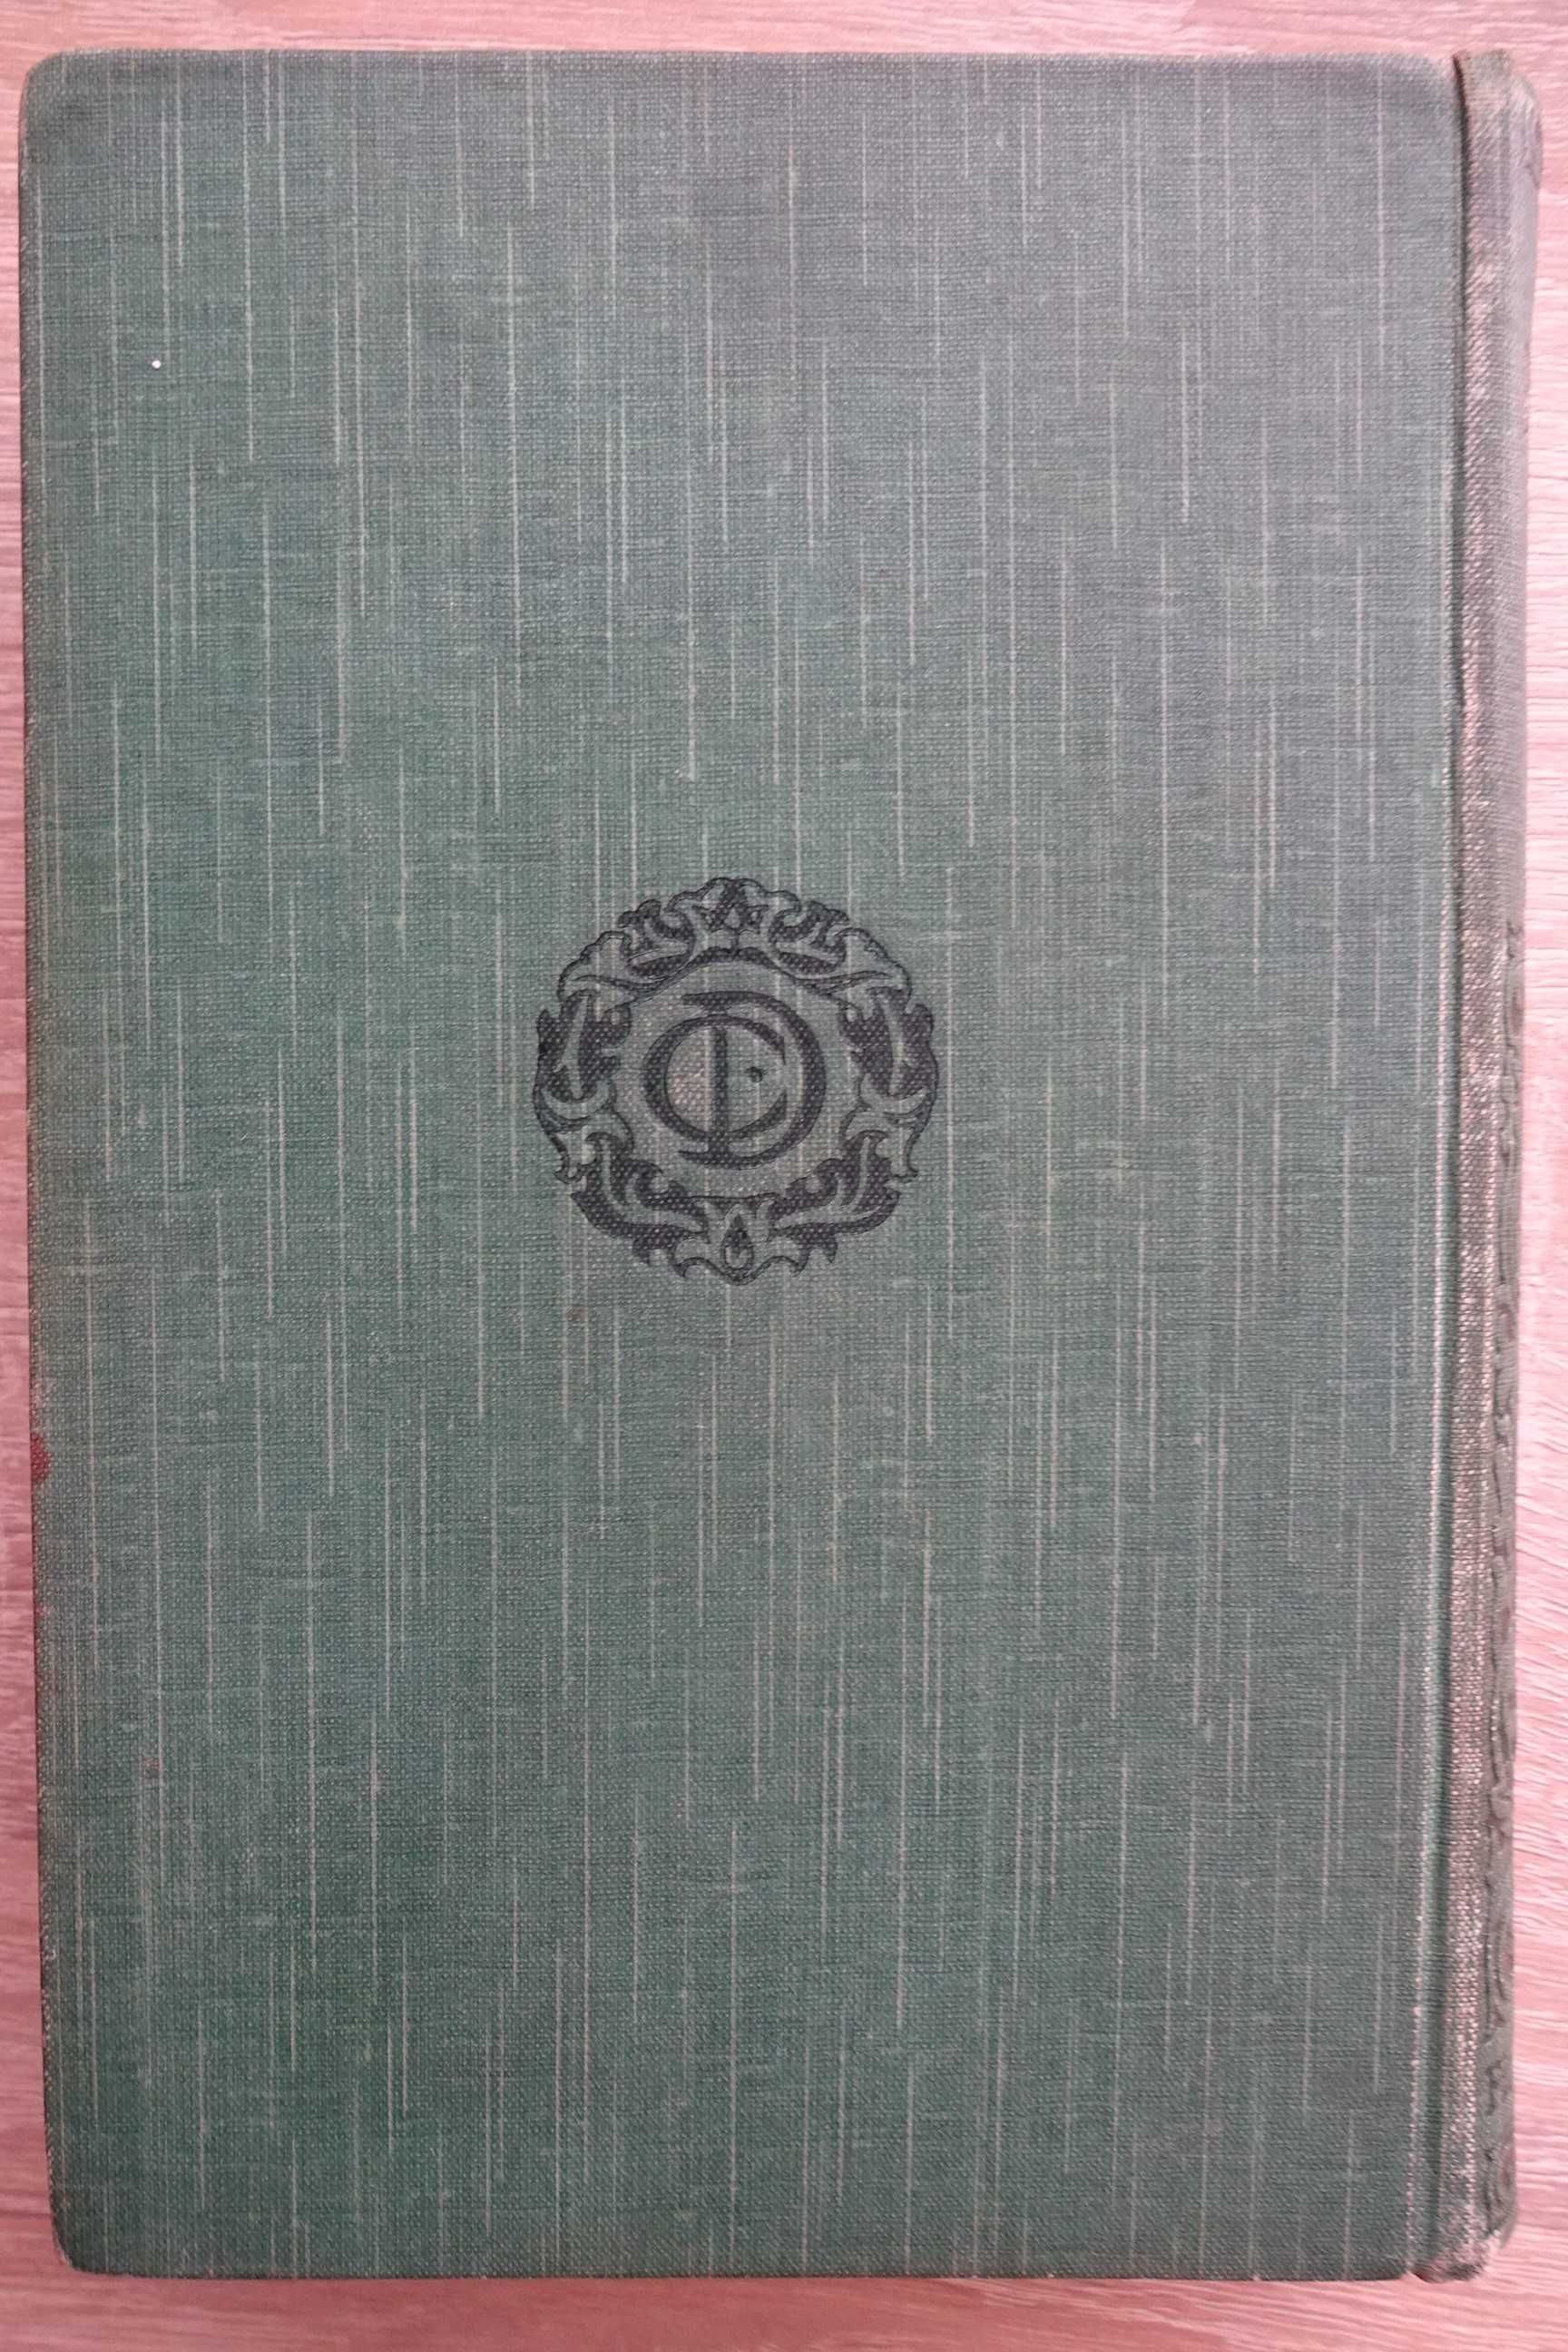 The Pickwick Papers - Charles Dickens - Fireside Edition